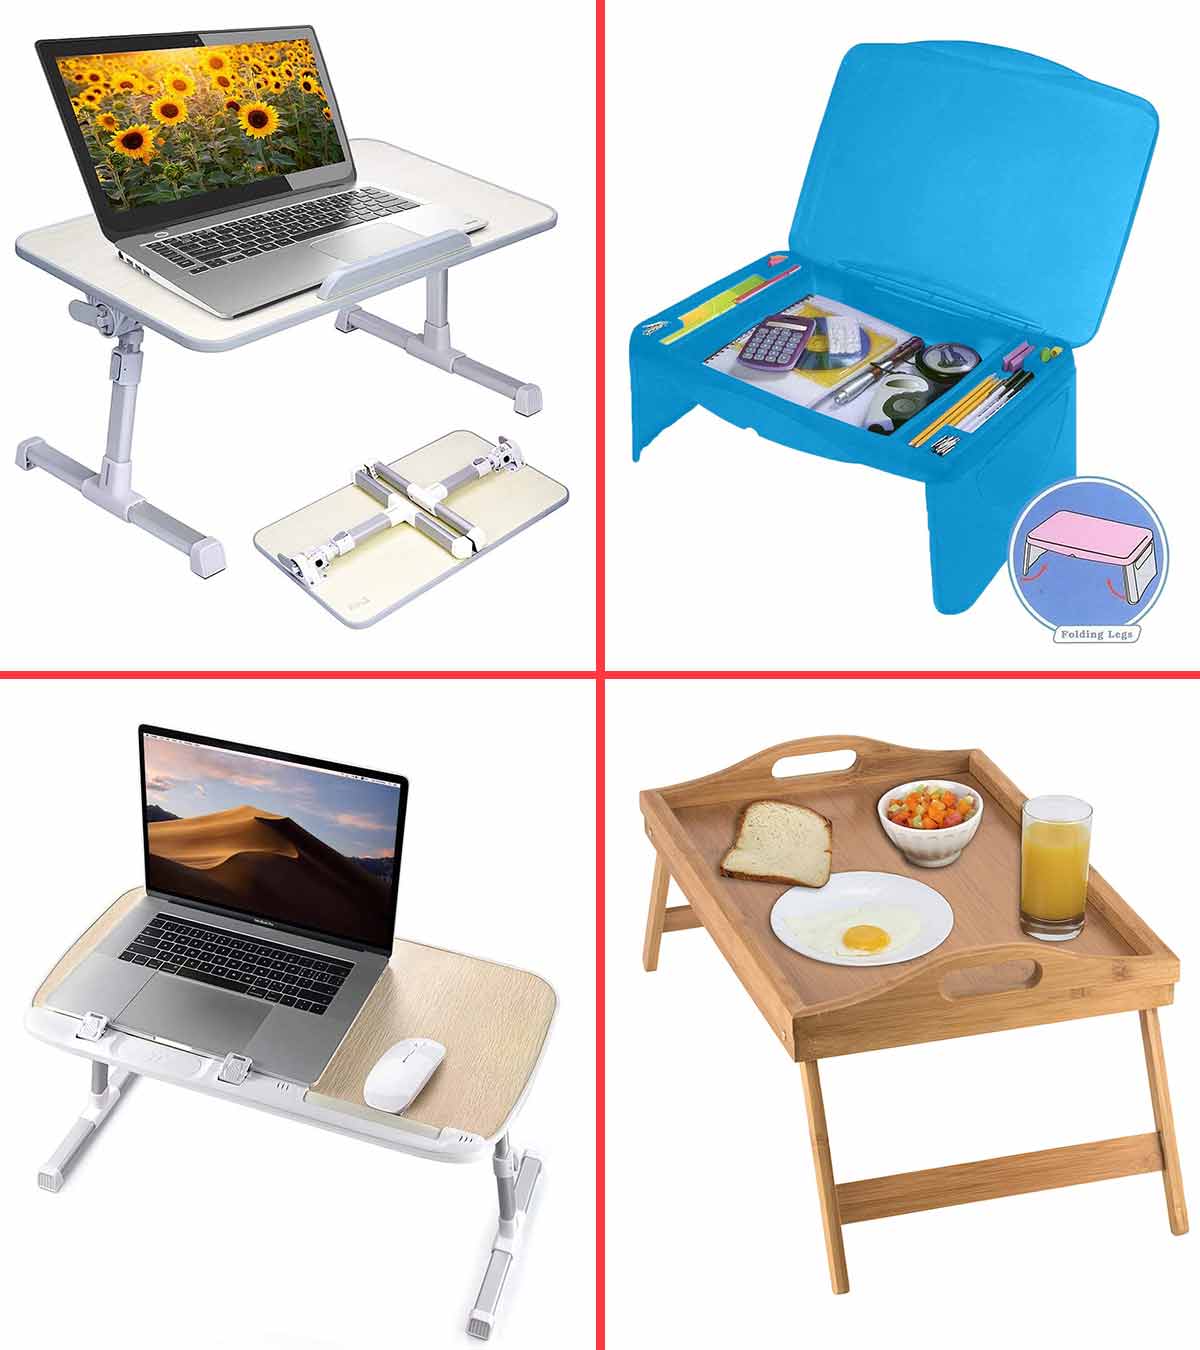 Laptop Desk Table Adjustable Bamboo Foldable Breakfast Serving Bed Tray  with Tilting Top Drawer, Bed Trays for Eating Breakfast